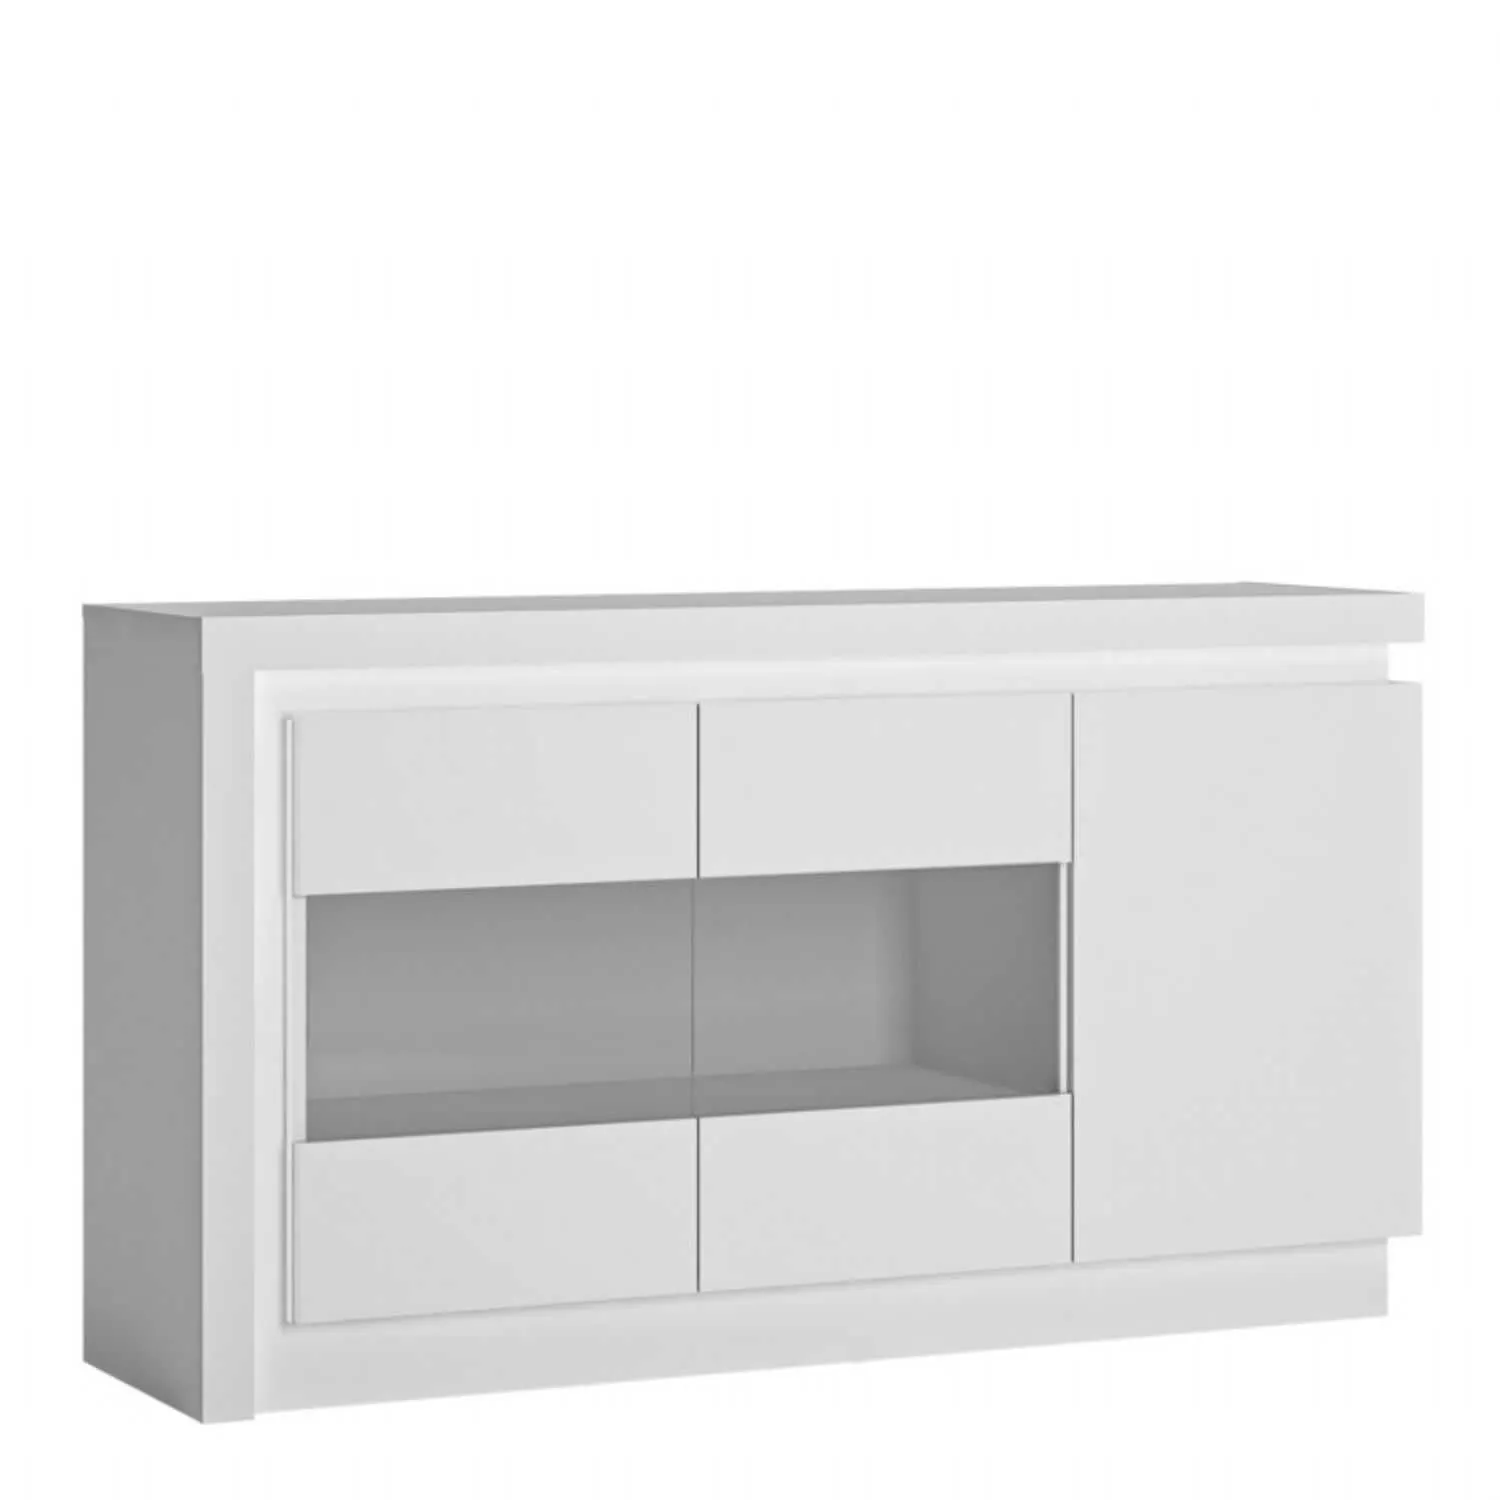 White and High Gloss 3 door glazed Sideboard with LED lighting